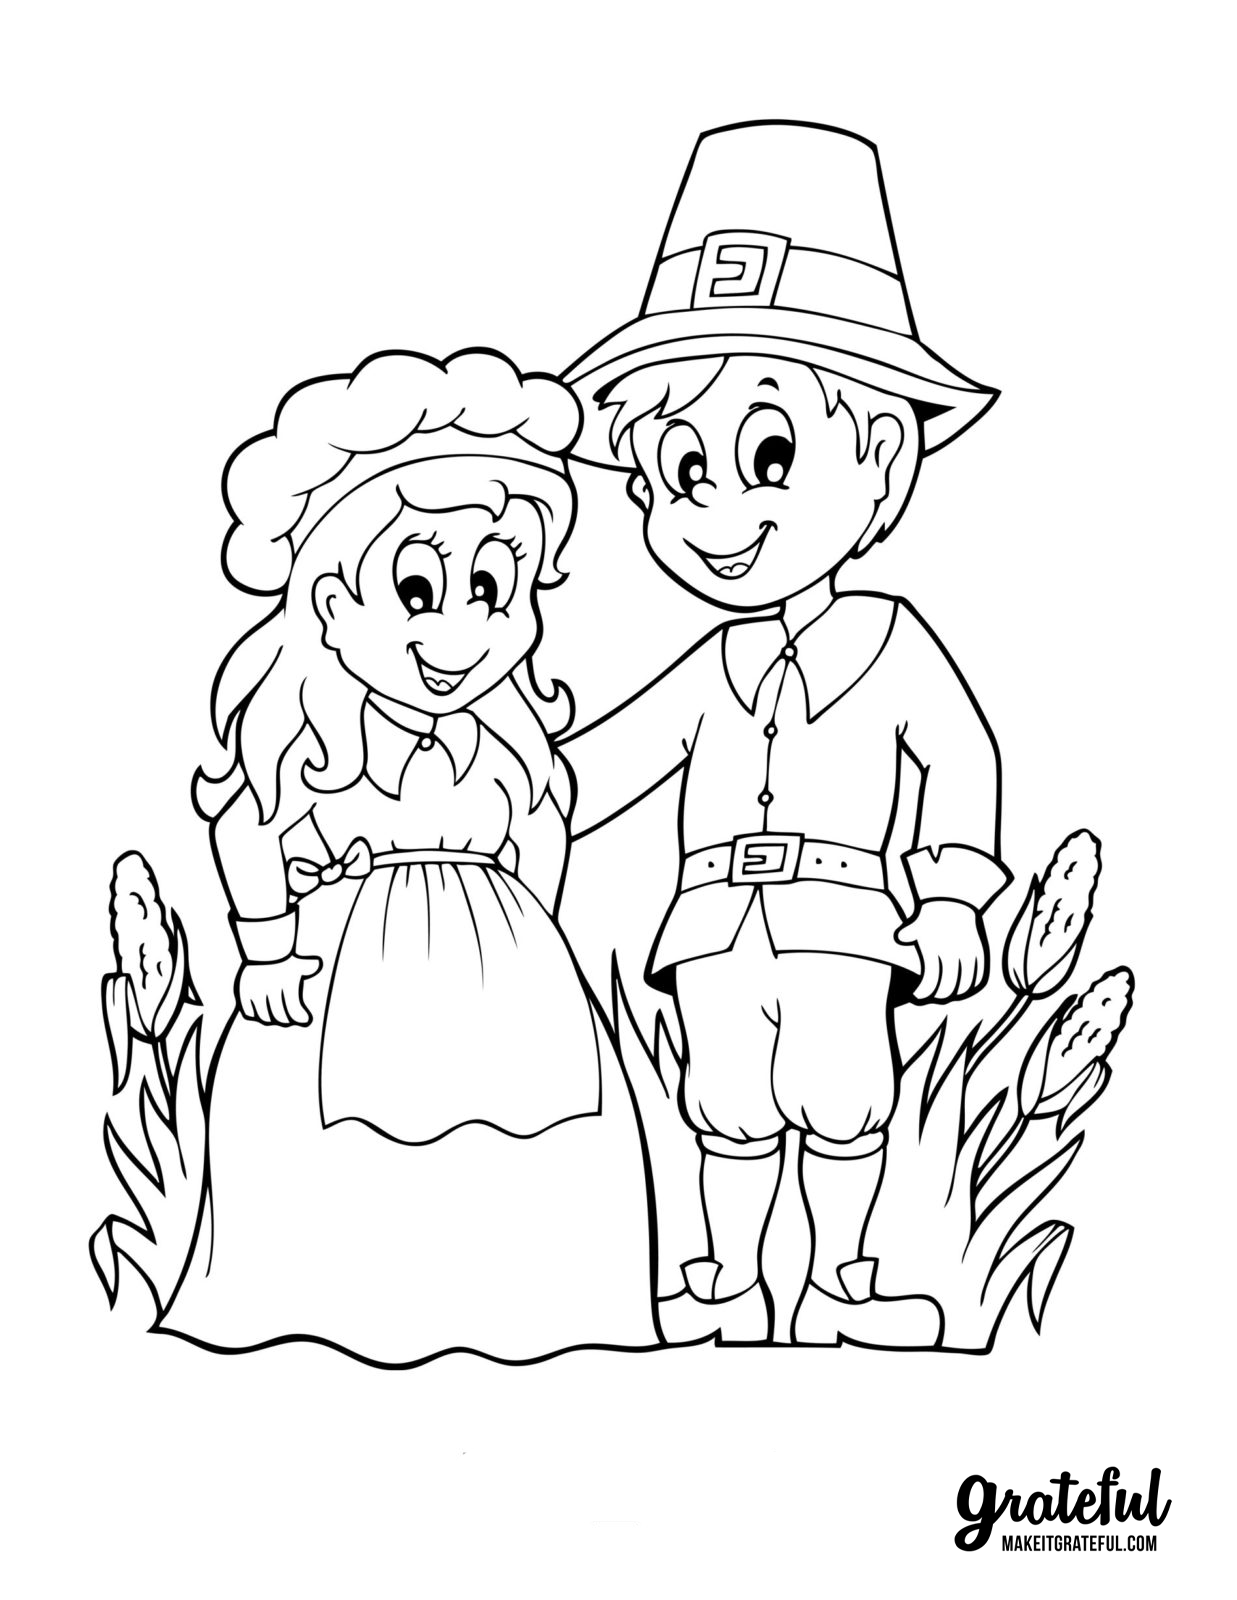 Thanksgiving Coloring Book Pages for Kids